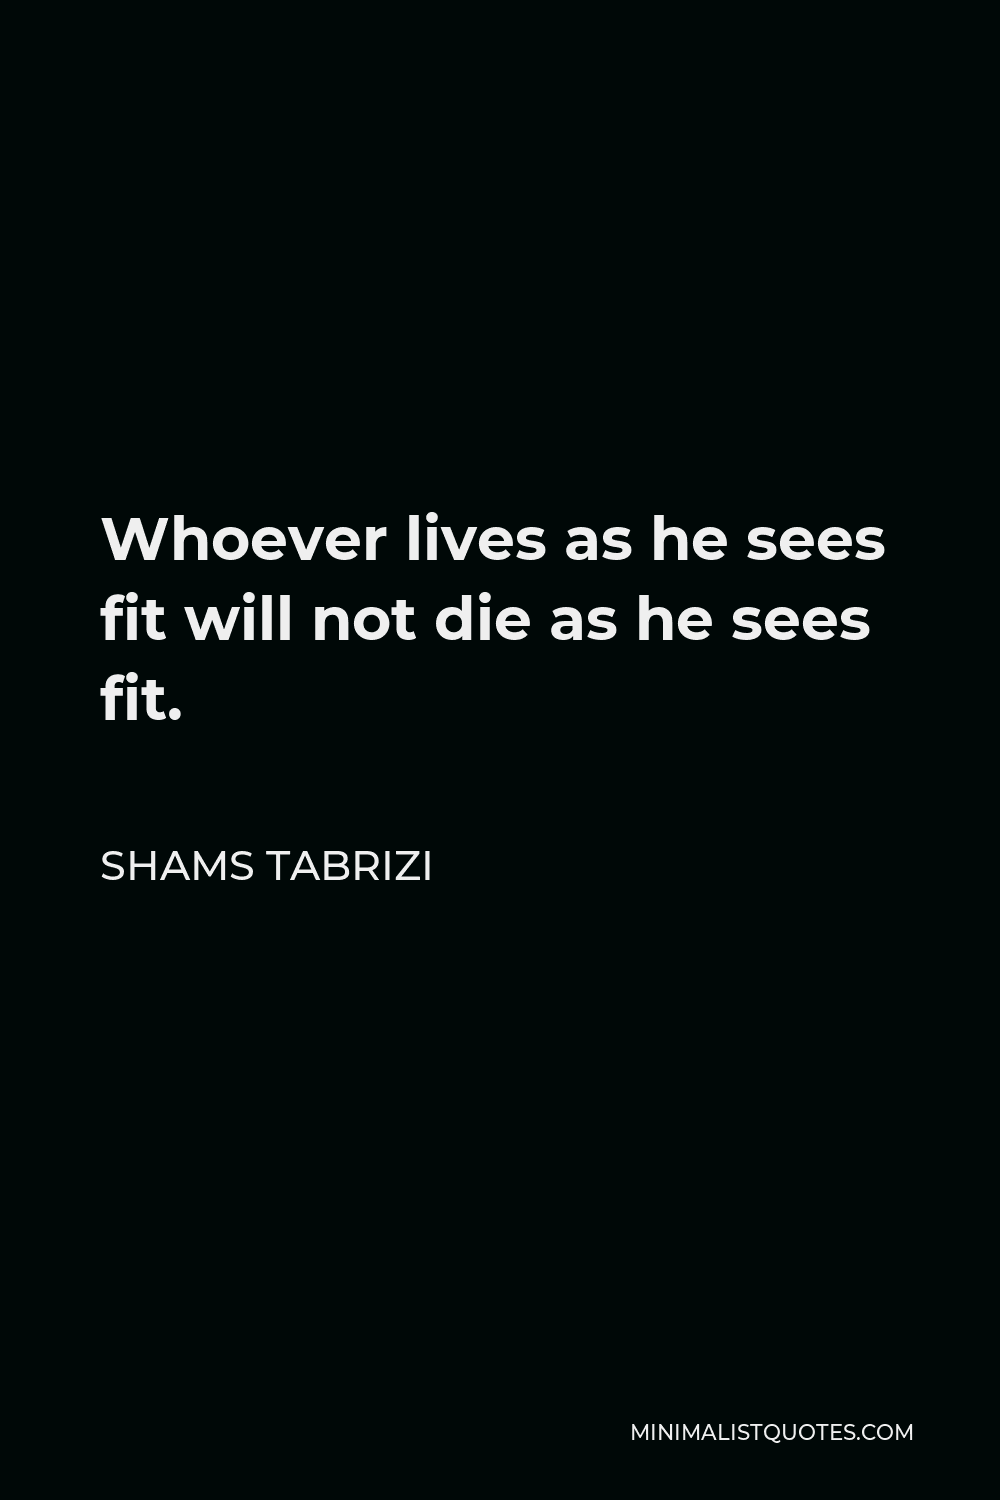 Shams Tabrizi Quote - Whoever lives as he sees fit will not die as he sees fit.